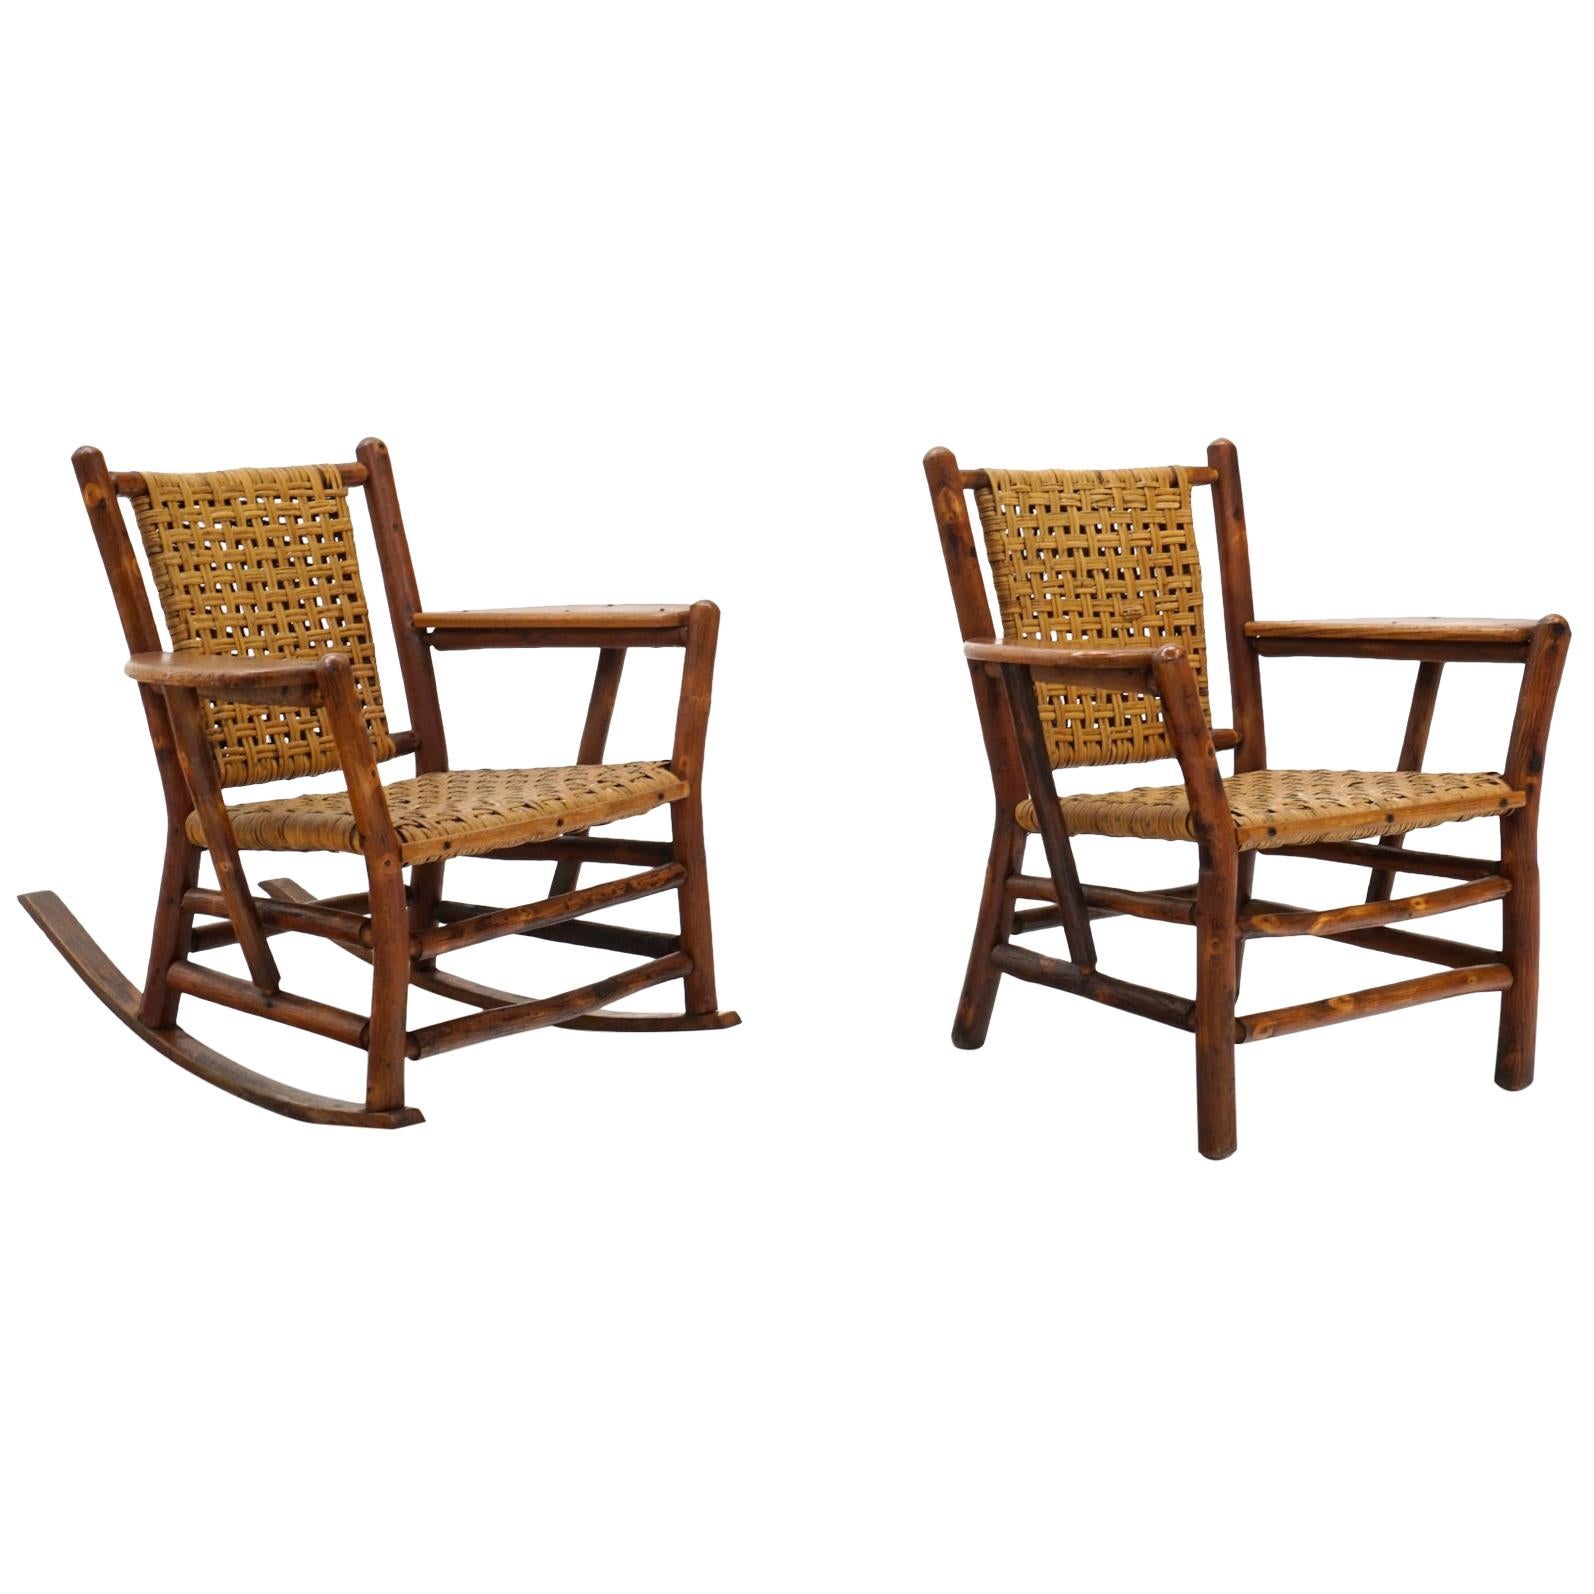 Pair of Rustic Old Hickory Chairs, One Lounge with Arms, One Rocker